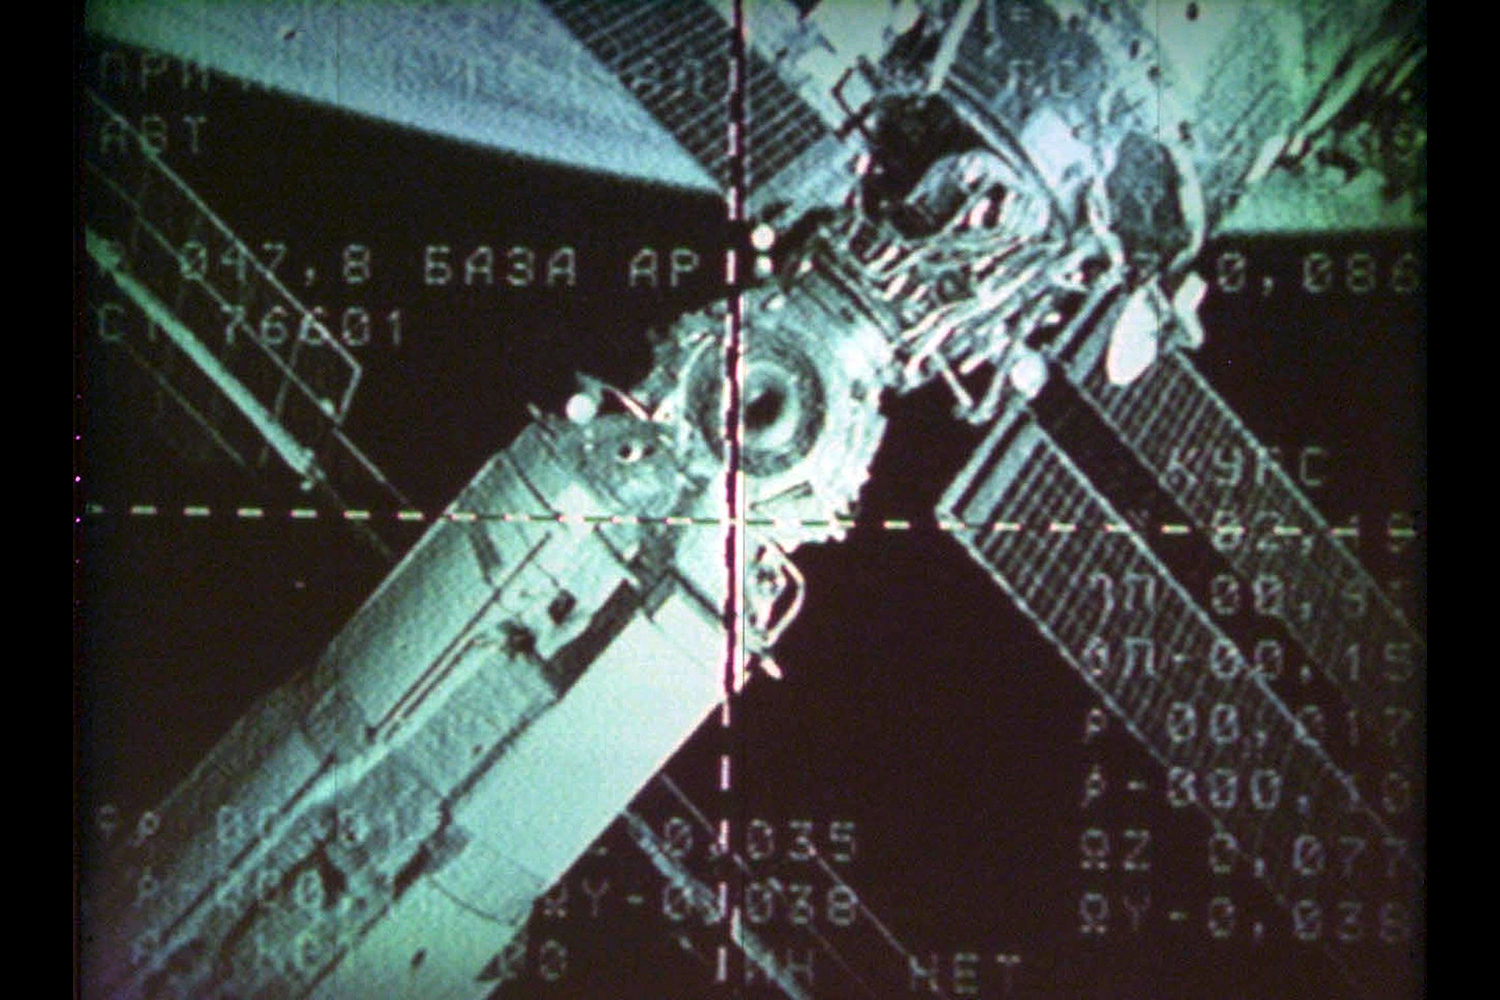 A TV screen at the Mission Control Center at Korolyov, Russia shows the docking camera of the International Space Station from the Soyuz TM-32 vessel, April 30, 2001.